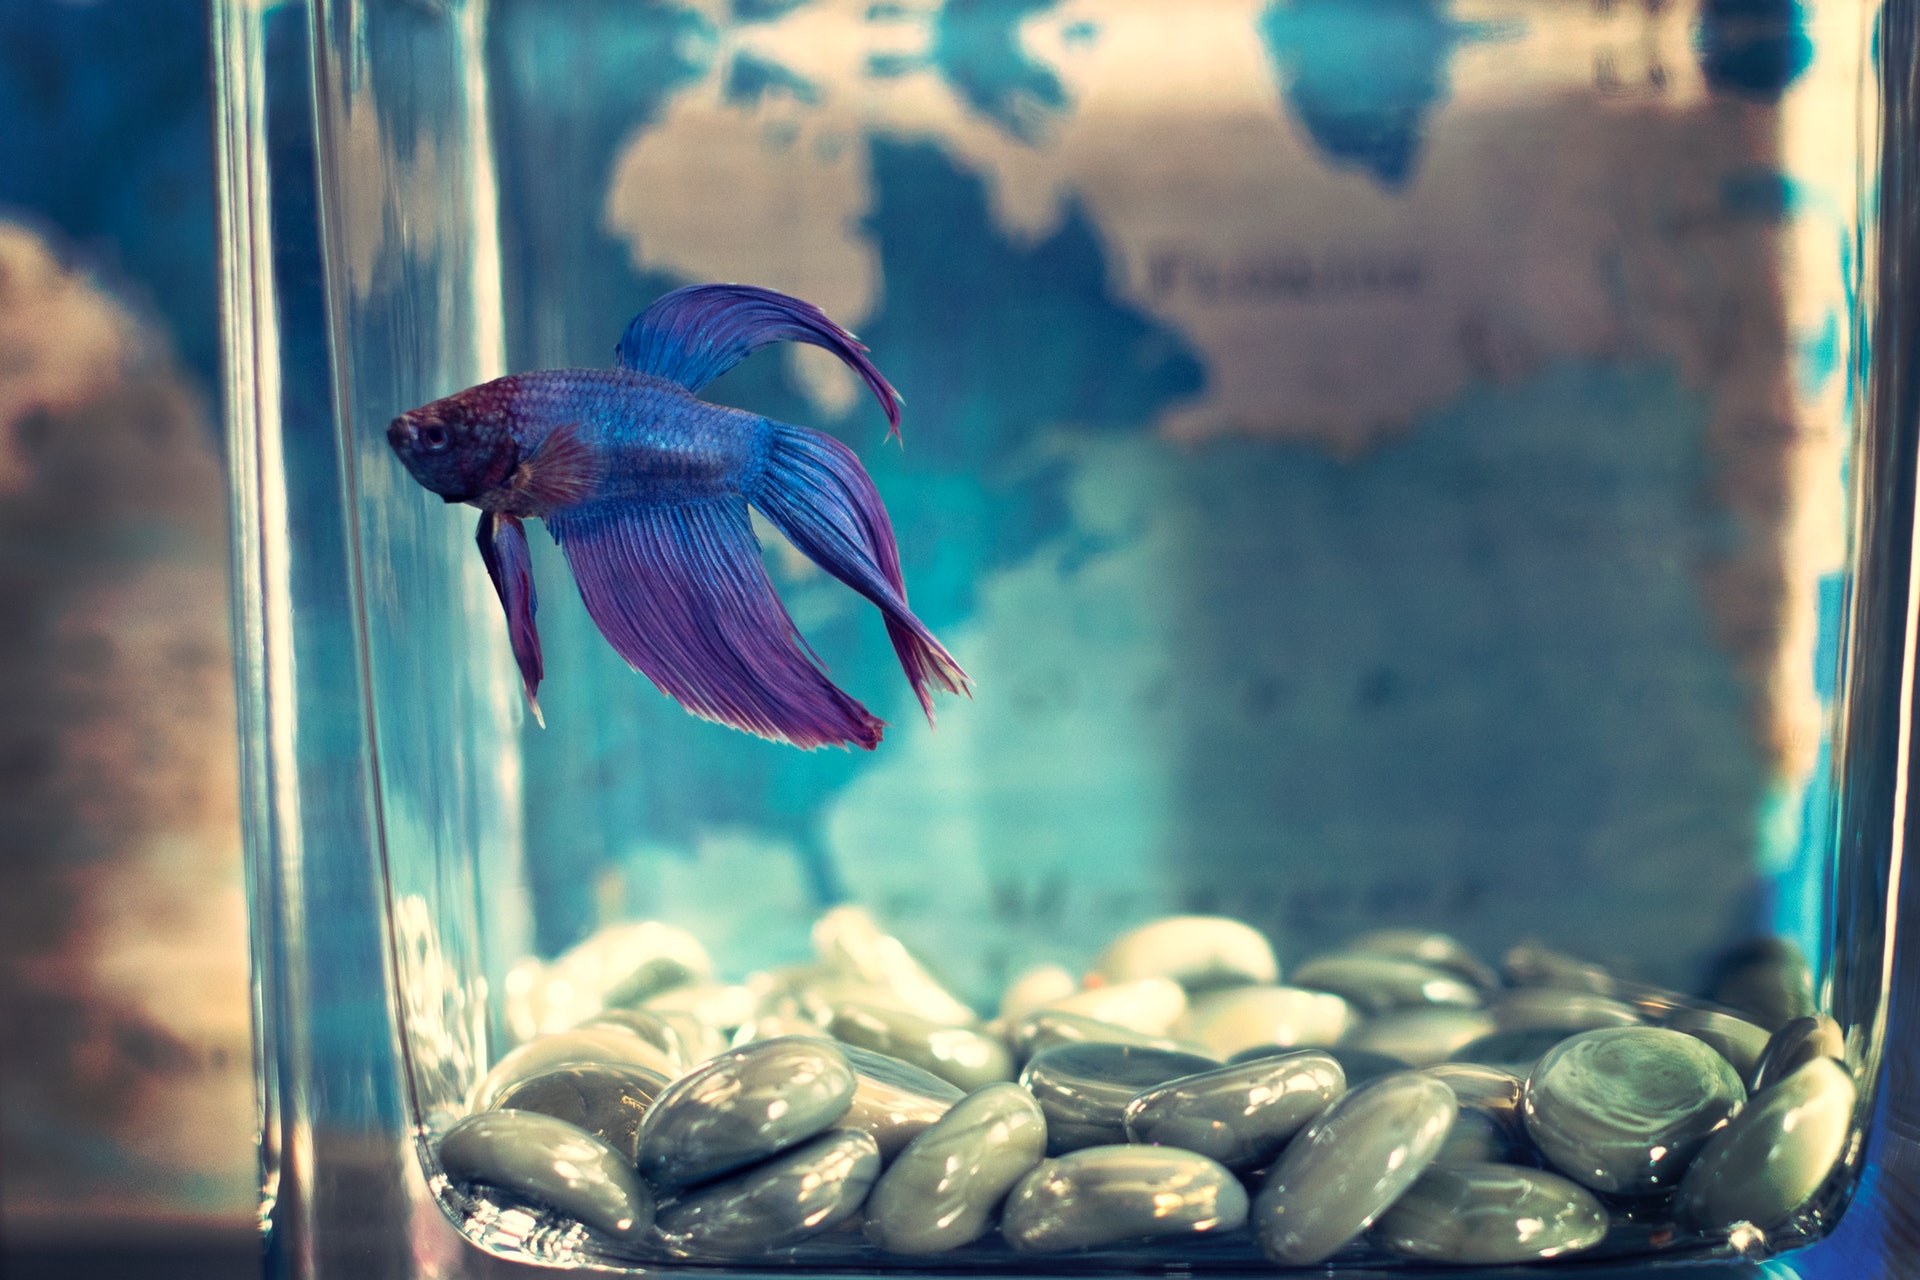 How Pet Fish Can Reduce the Aches and Pains of Stress